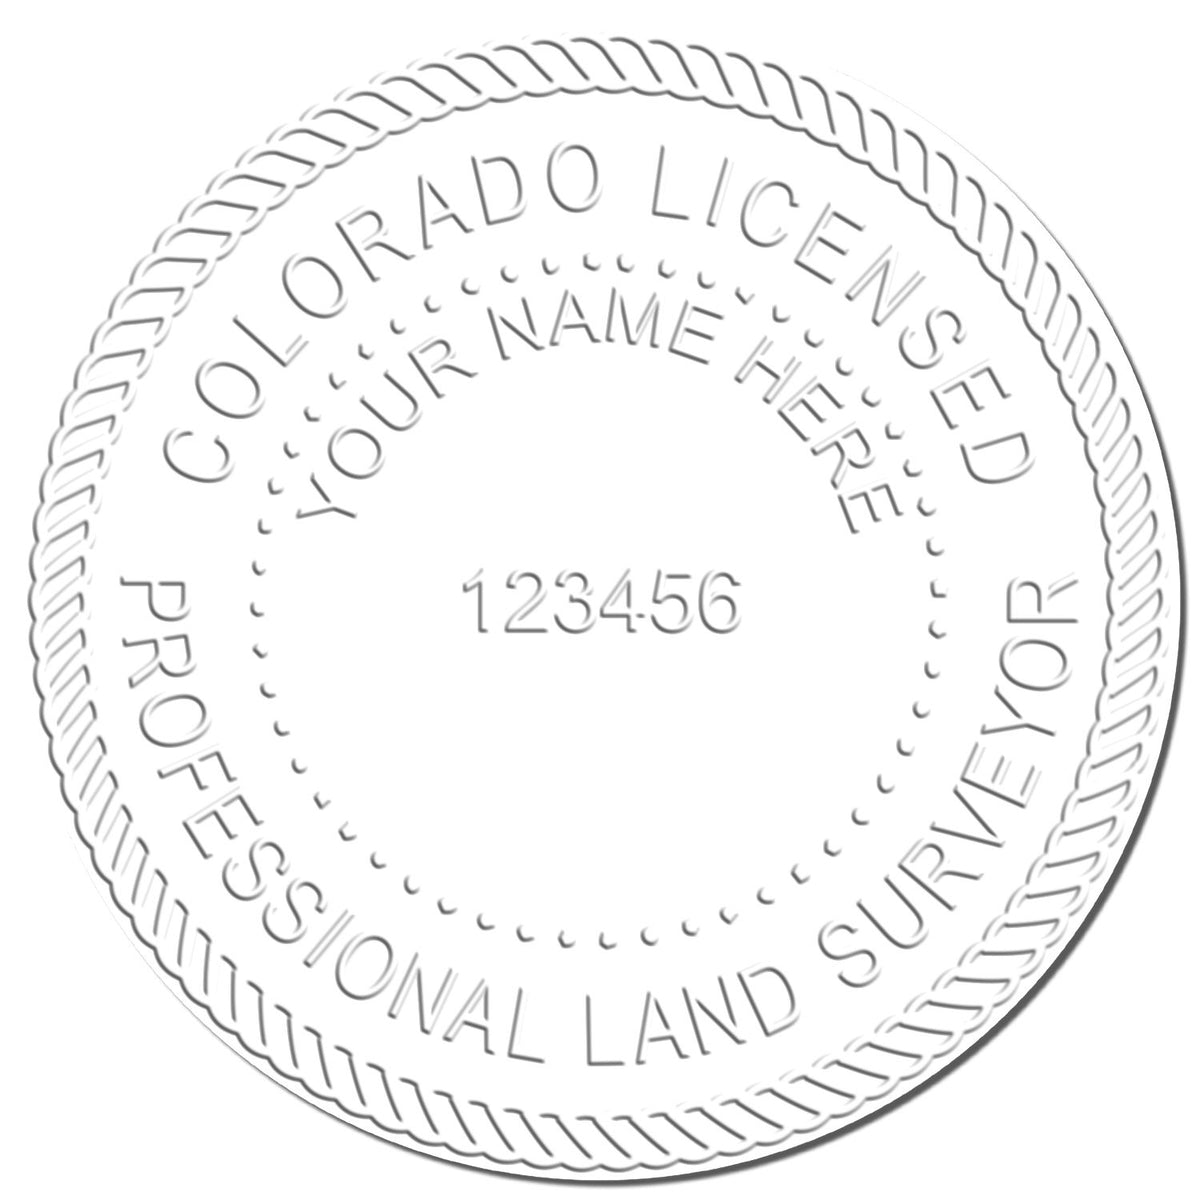 This paper is stamped with a sample imprint of the Extended Long Reach Colorado Surveyor Embosser, signifying its quality and reliability.